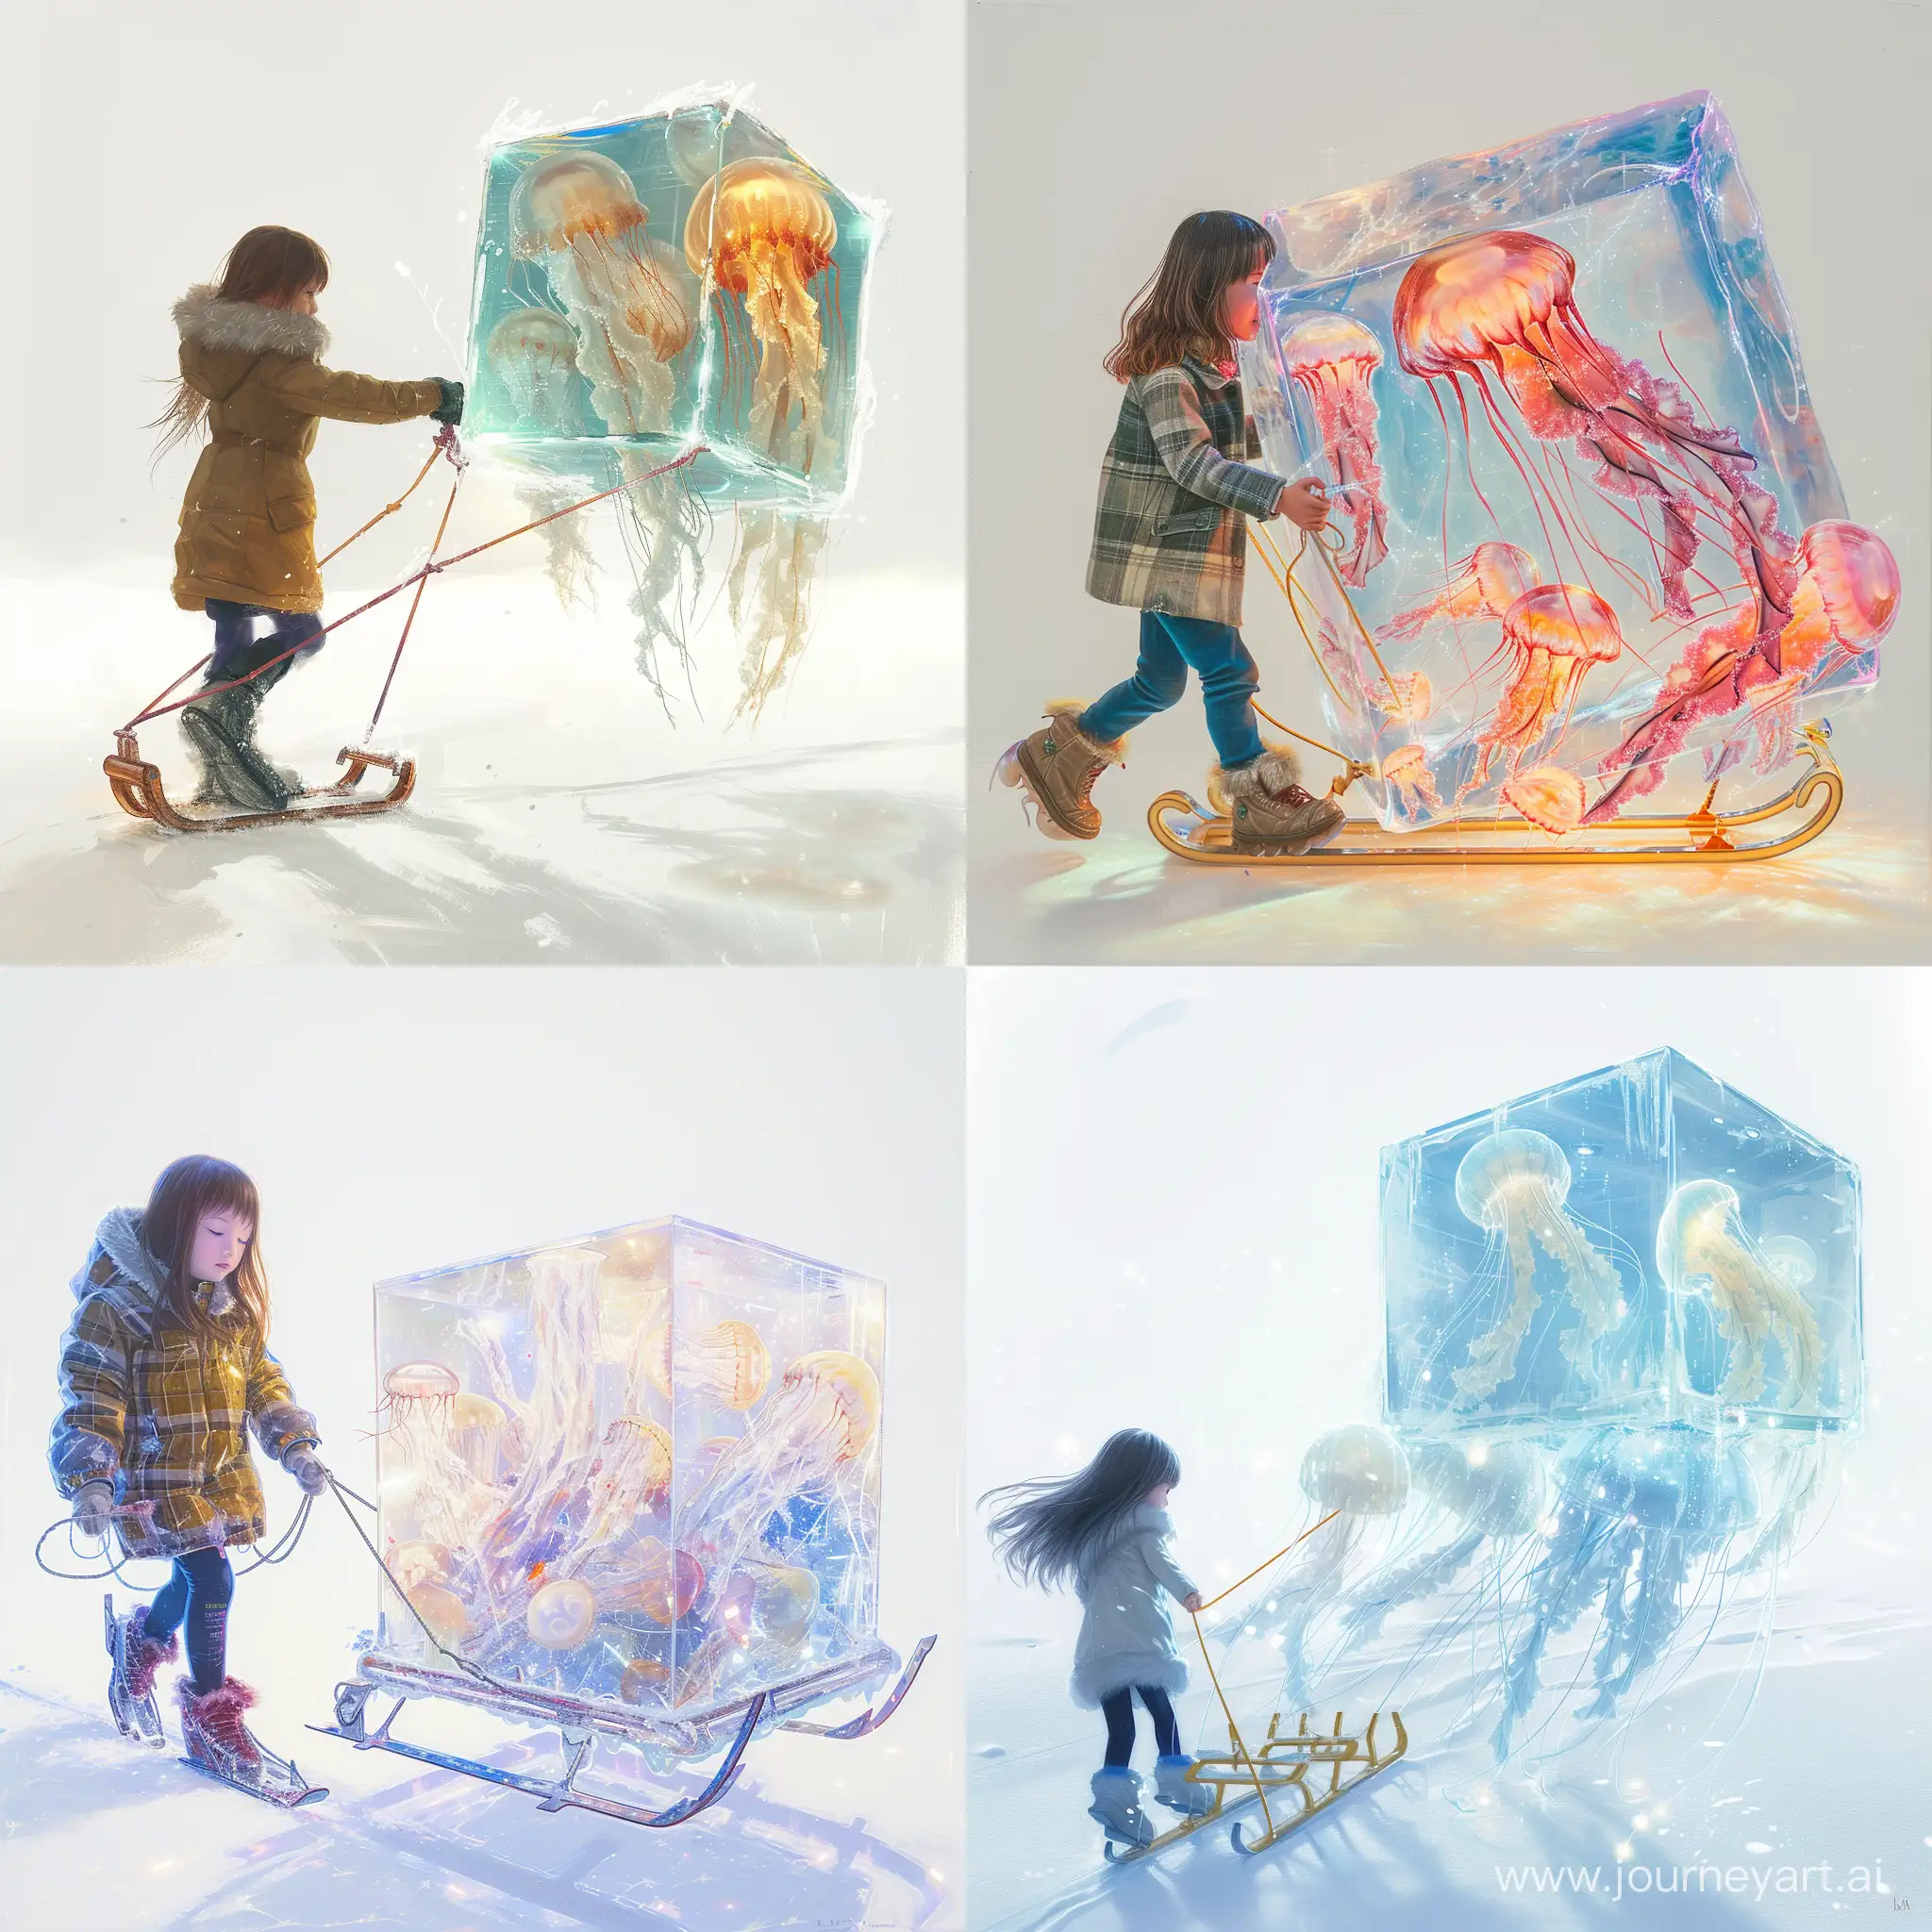 Enchanting-12YearOld-Girl-Pulling-a-Sled-with-Frozen-Glowing-Jellyfish-in-Glass-Cube